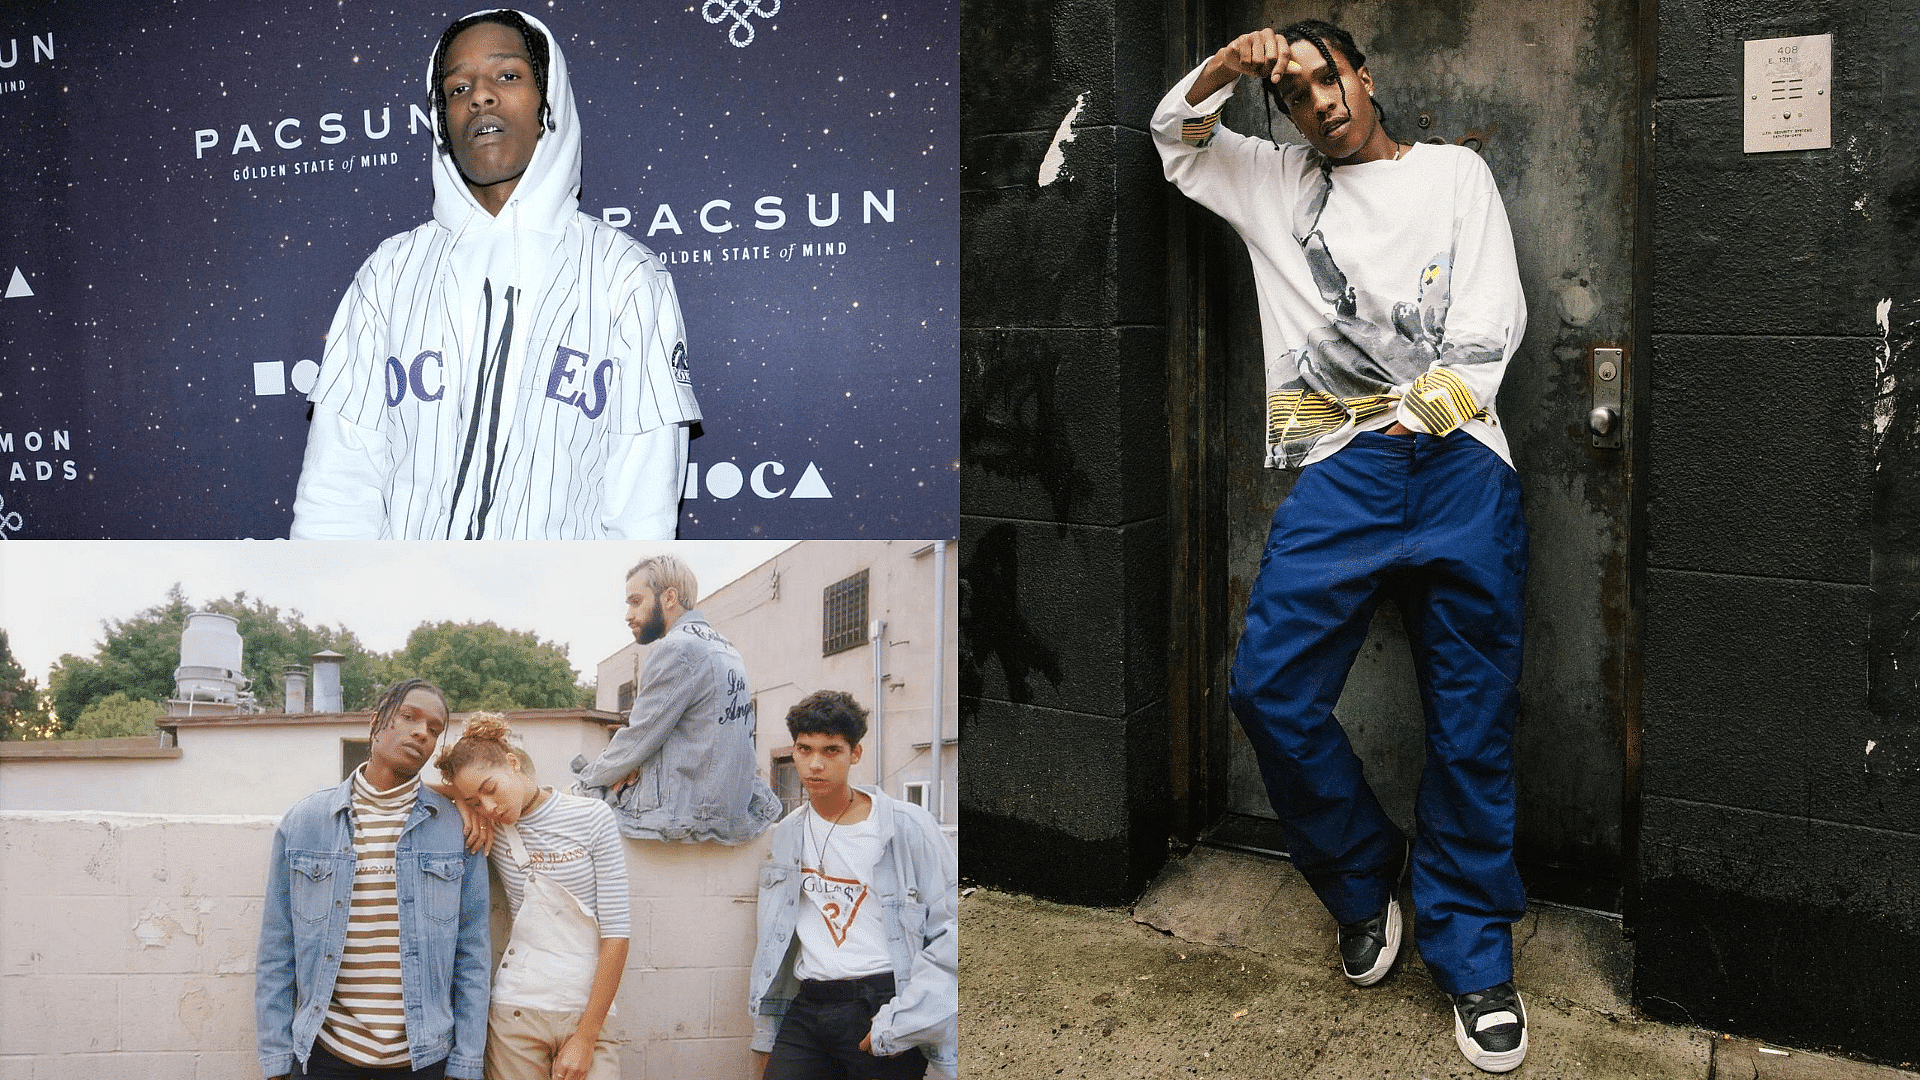 Brands endorsed by ASAP Rocky